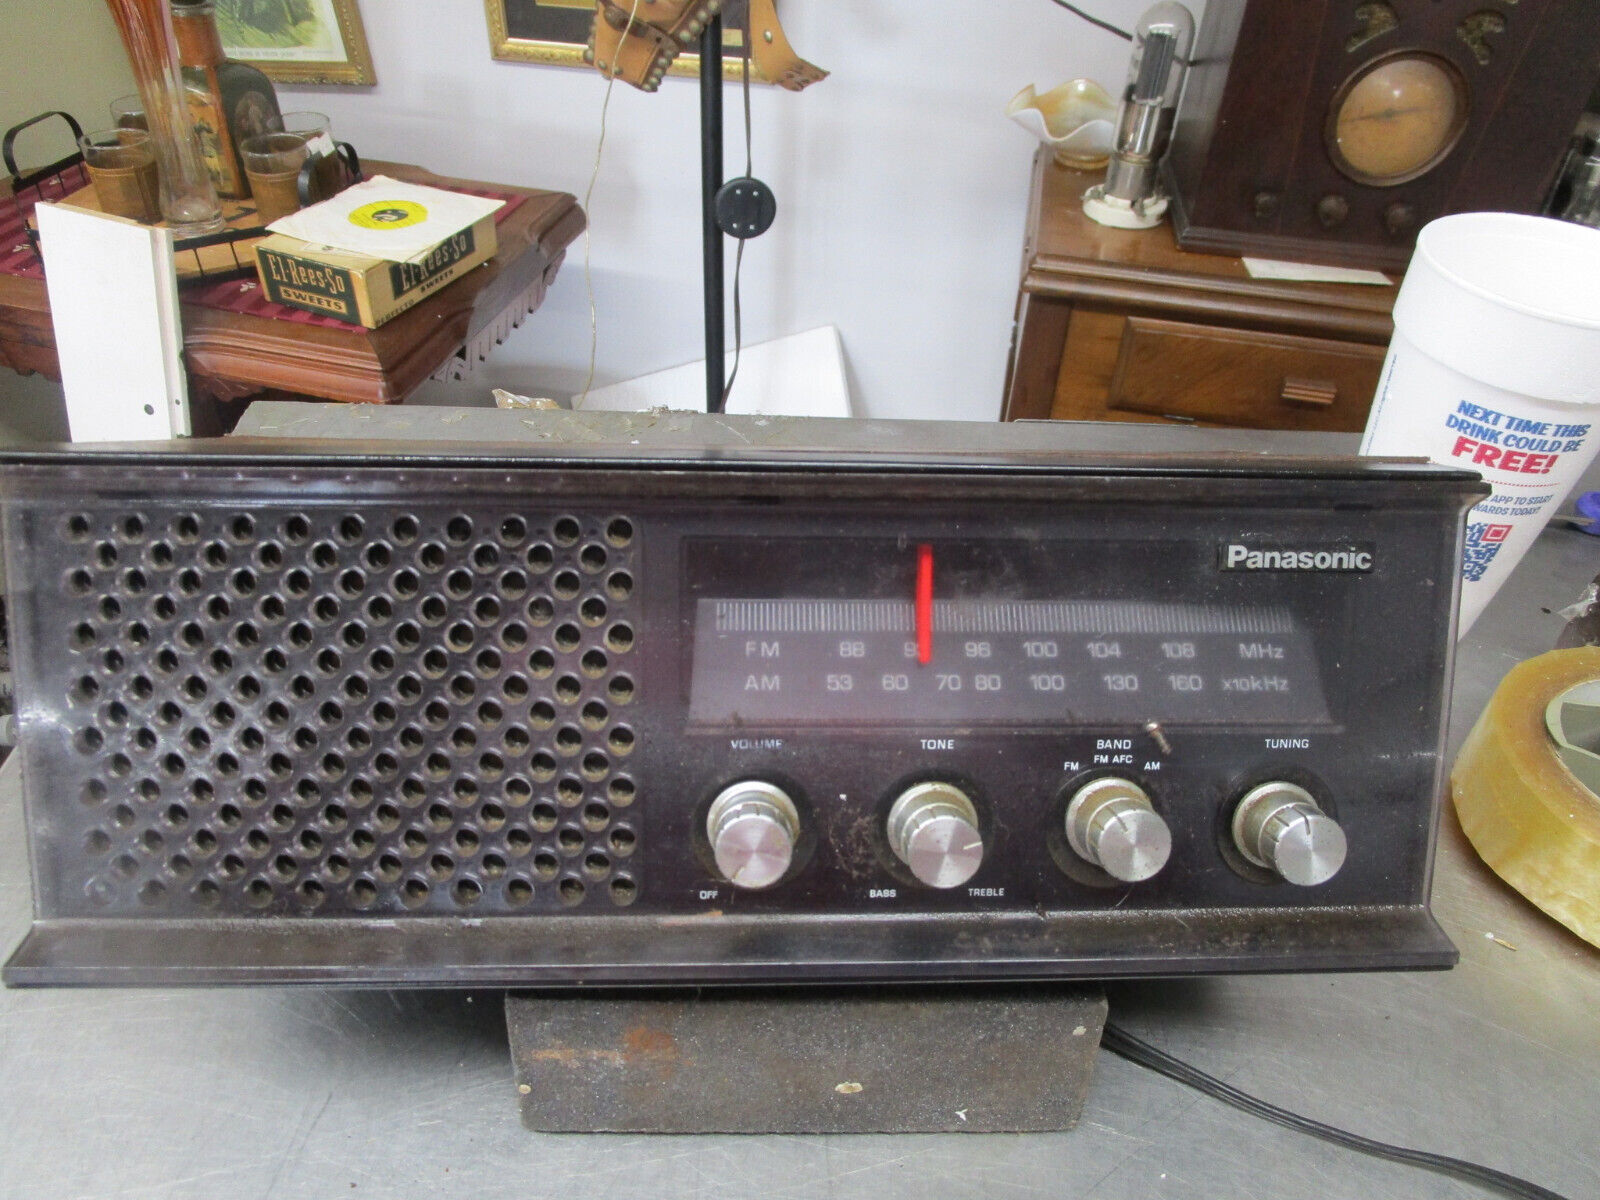 Vintage Panasonic AM-FM Tabletop Radio RE-6513 Tested and working